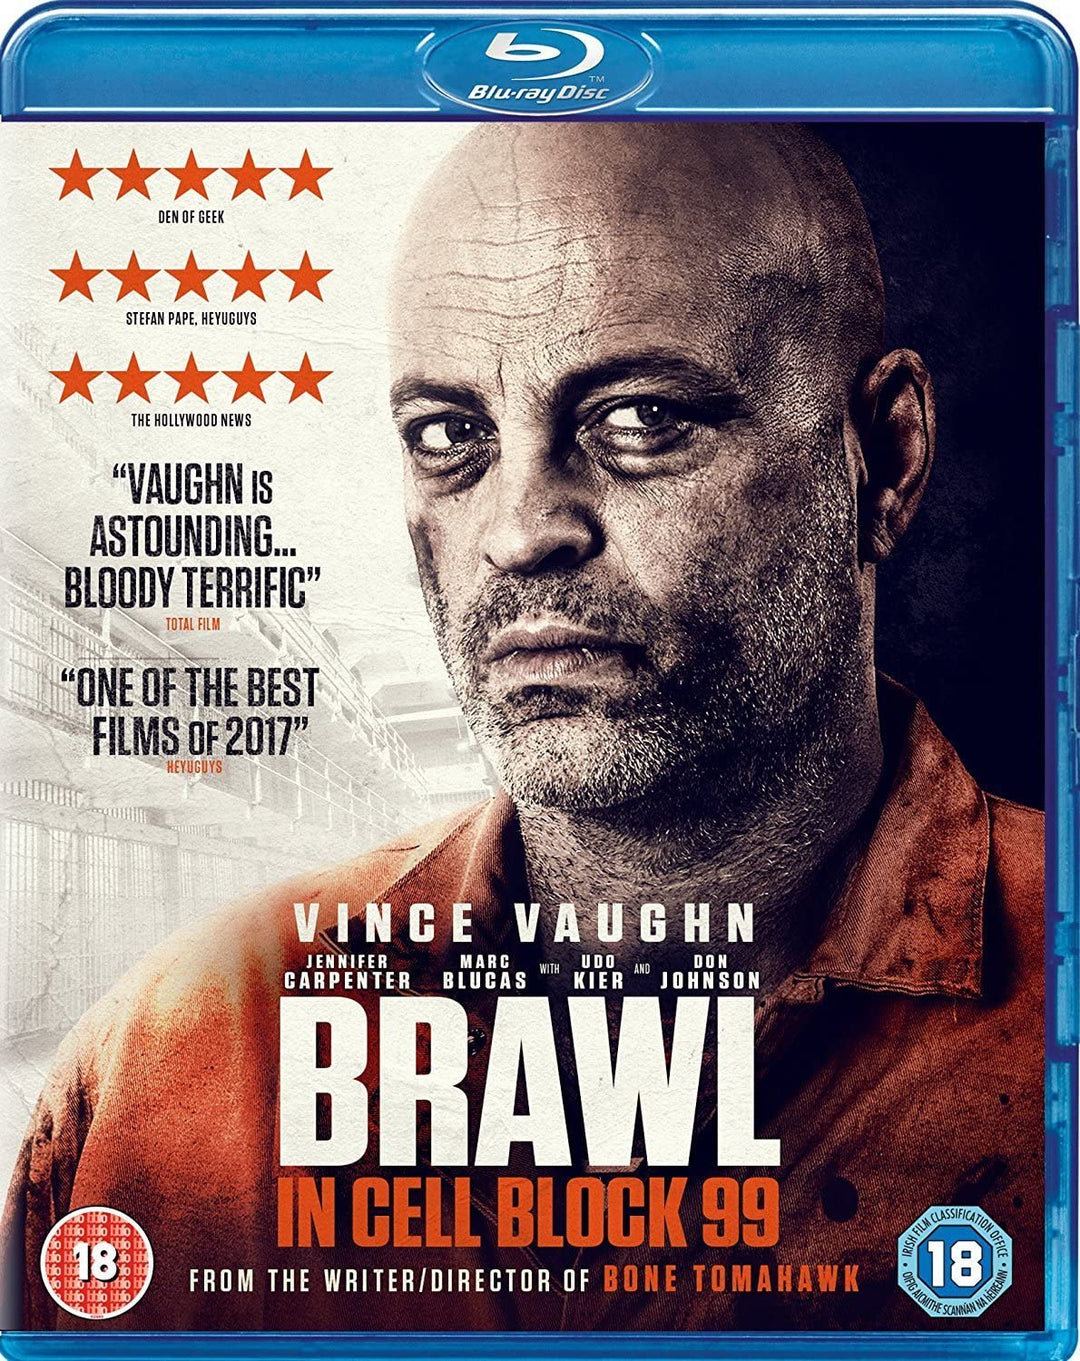 Brawl In Cell Block 99 – Action/Thriller [Blu-ray]